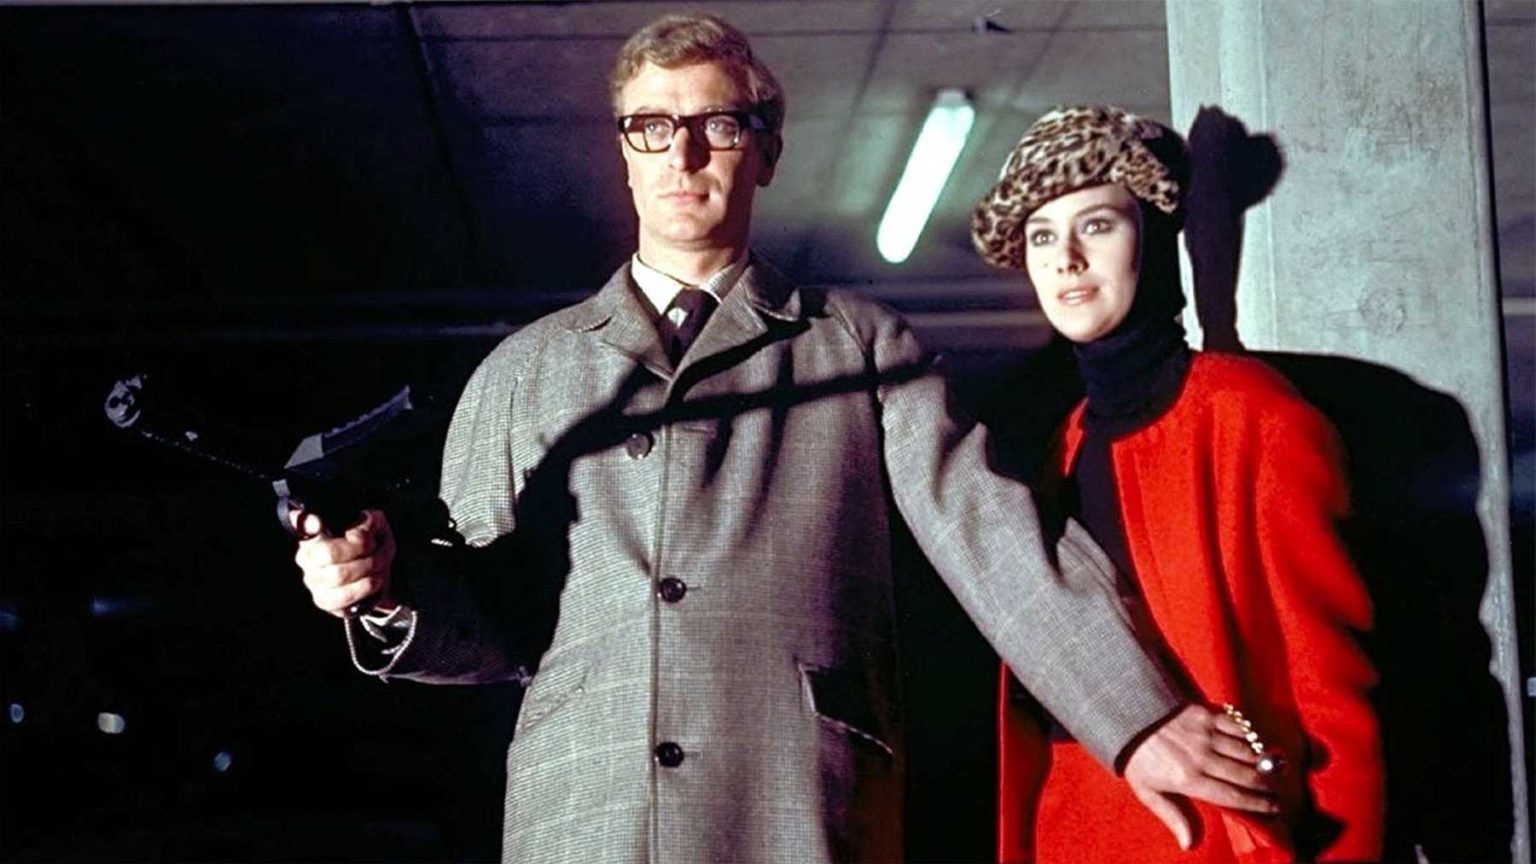 ۱۹- The Ipcress File (1965)